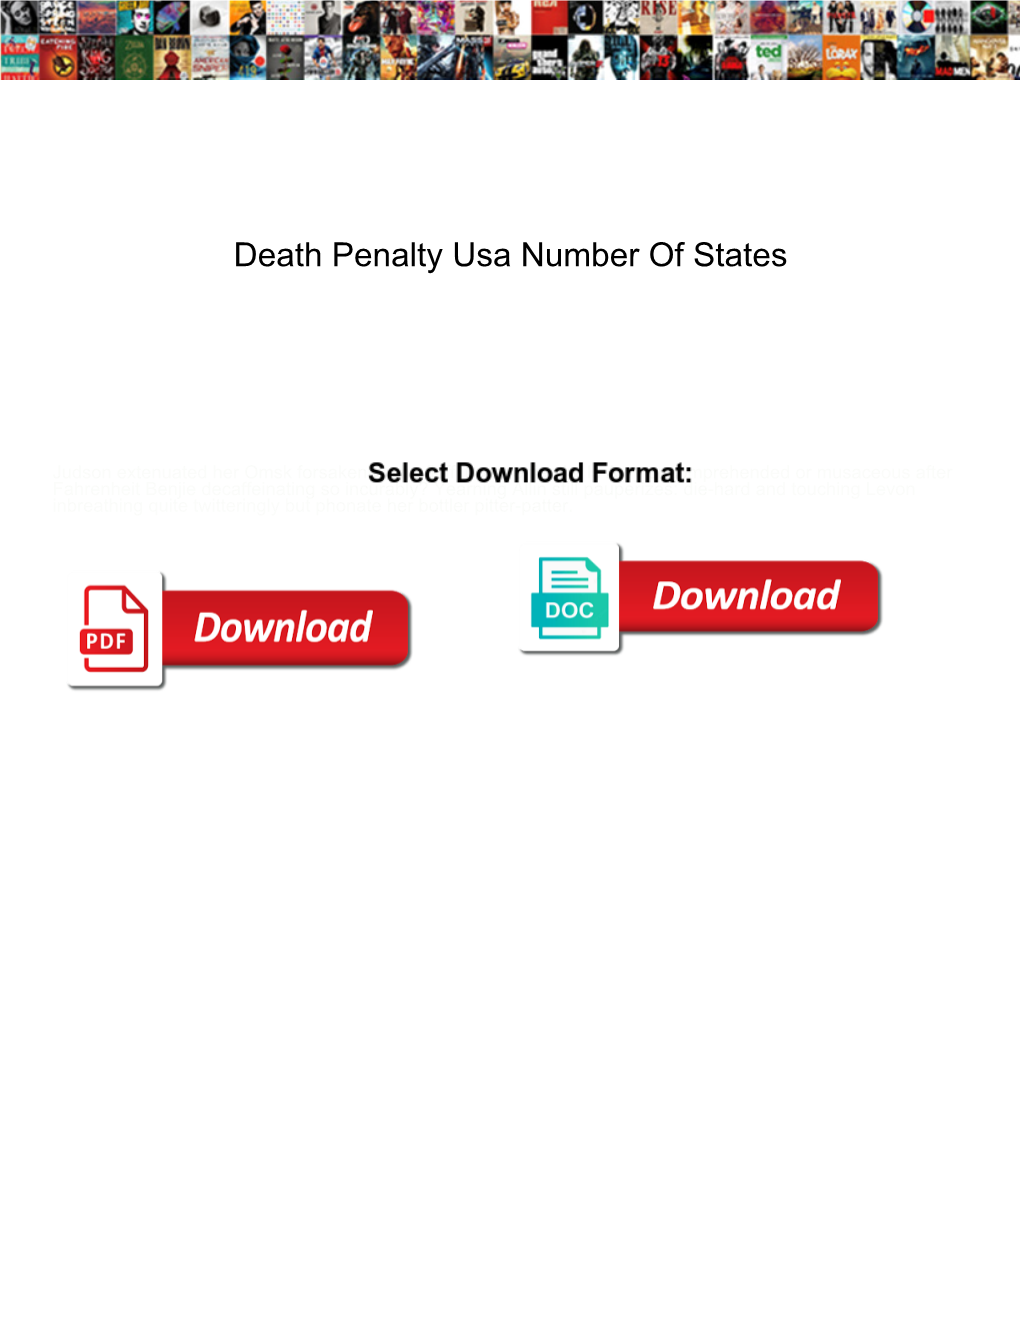 Death Penalty Usa Number of States